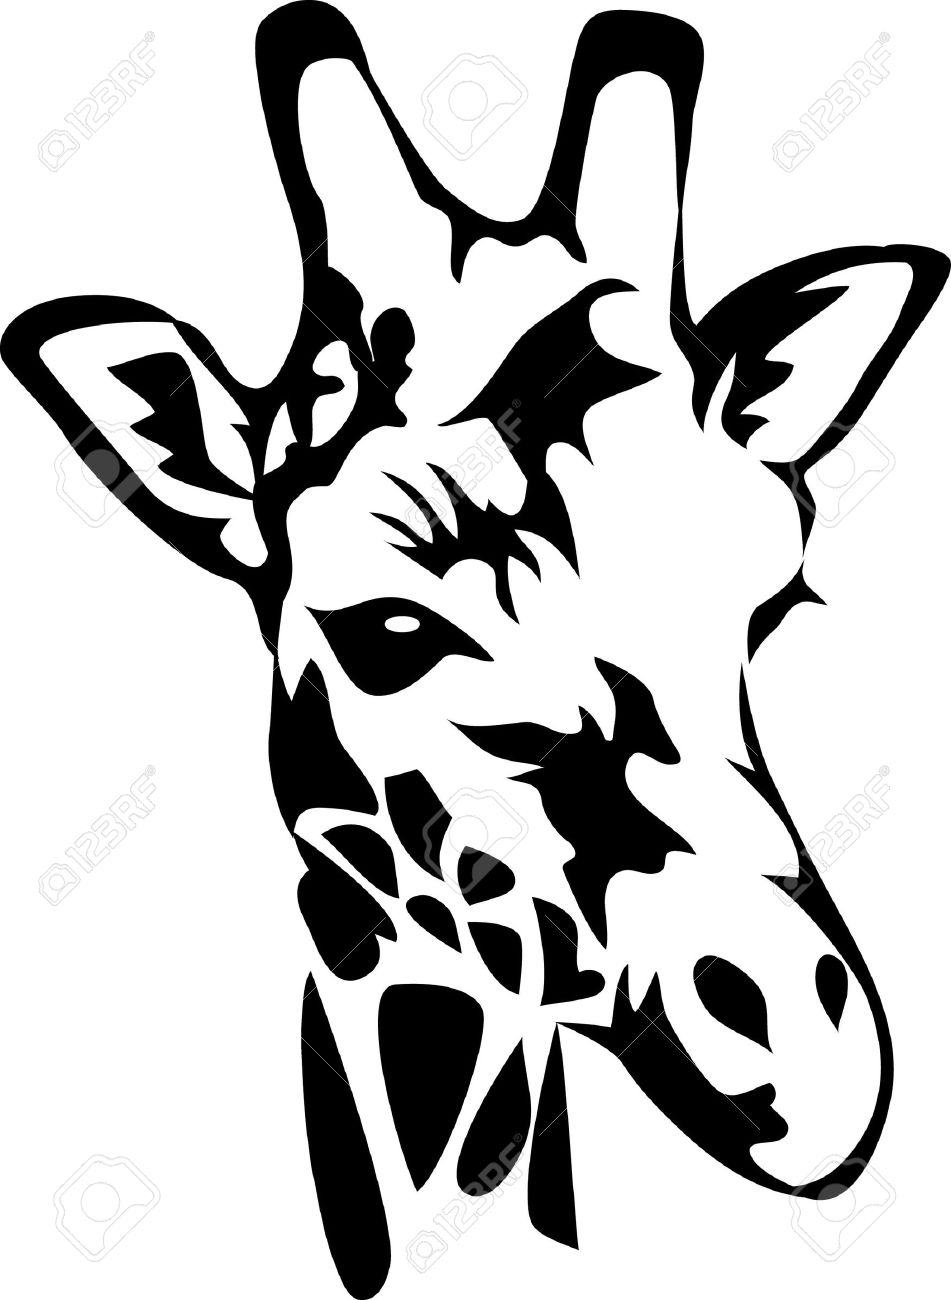 Giraffe Black And White | Free download on ClipArtMag